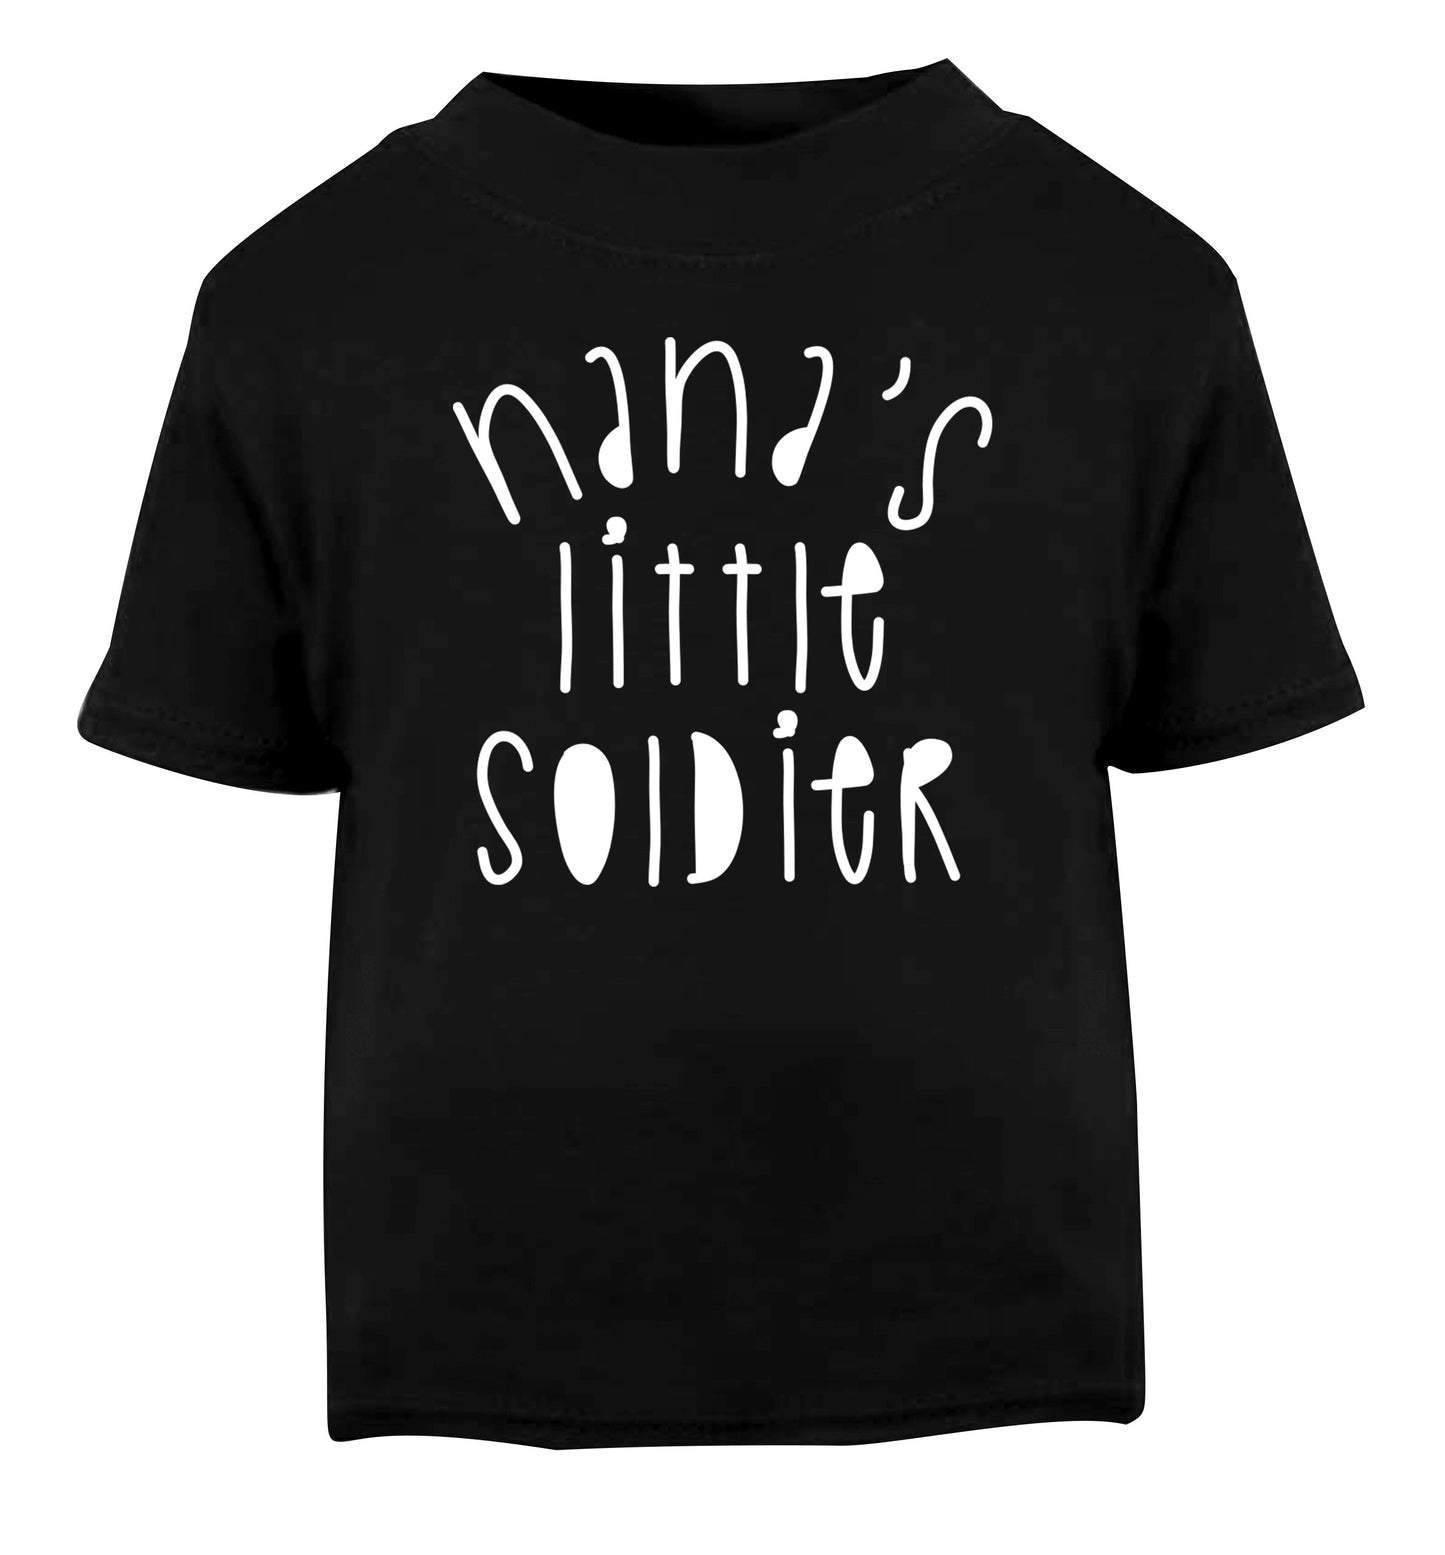 Nana's little soldier Black Baby Toddler Tshirt 2 years